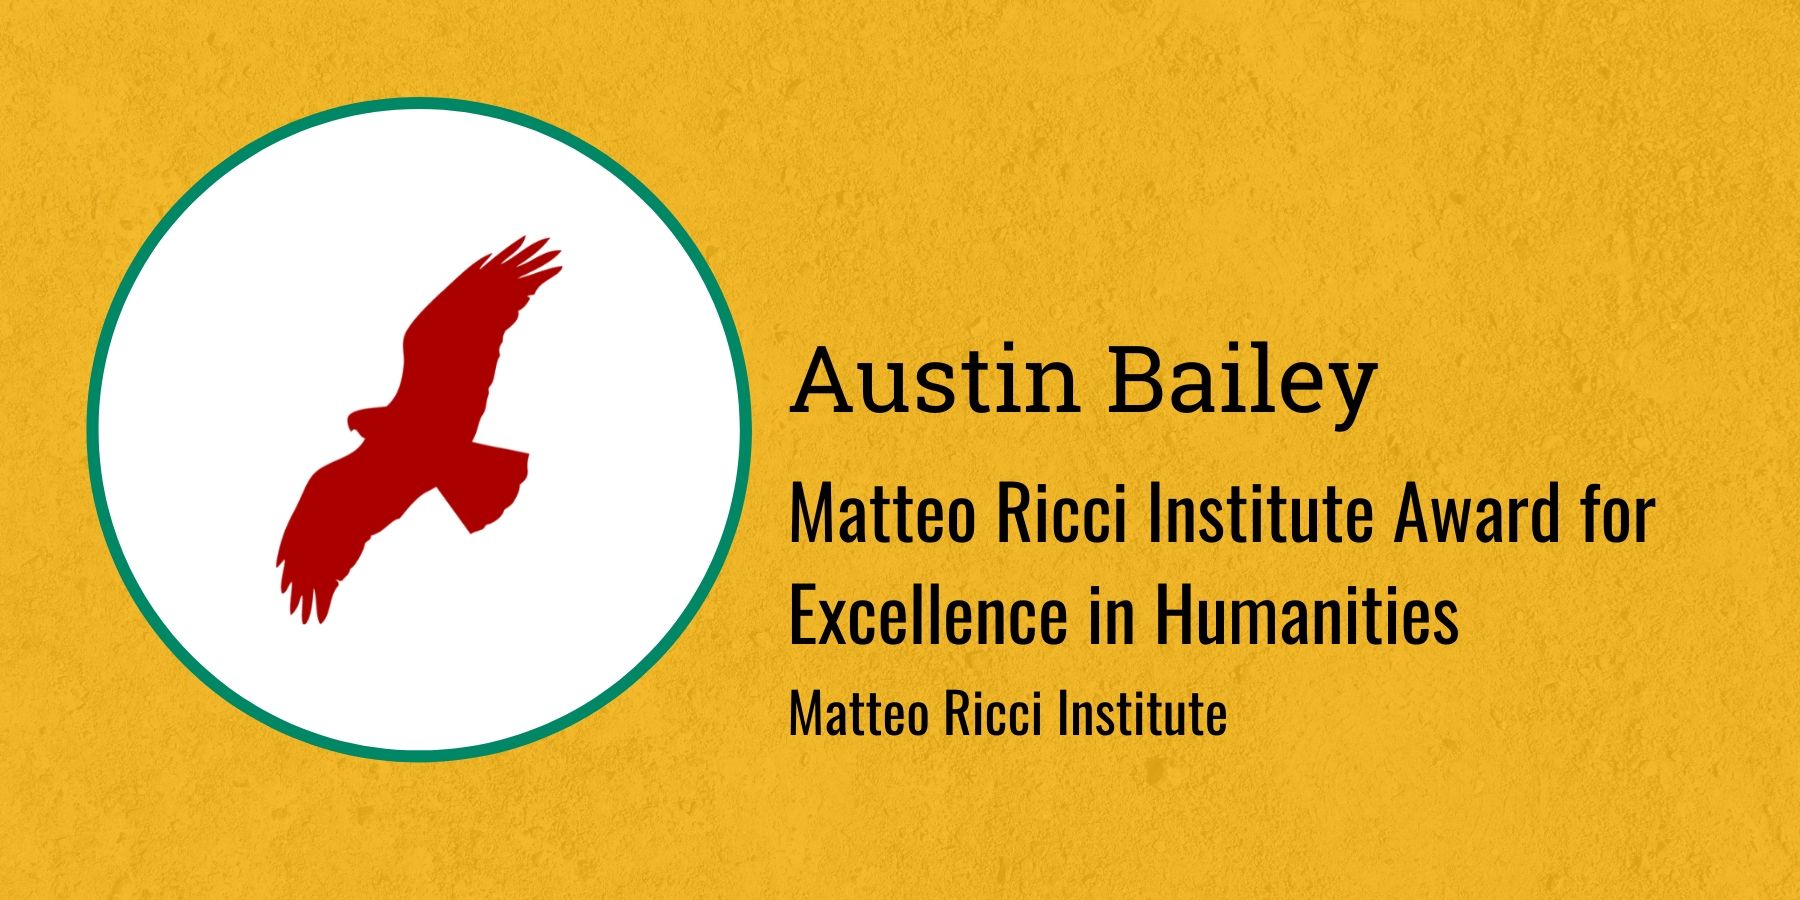 Image of Redhawk and text: Matteo Ricci Institute Award for Excellence in Humanities